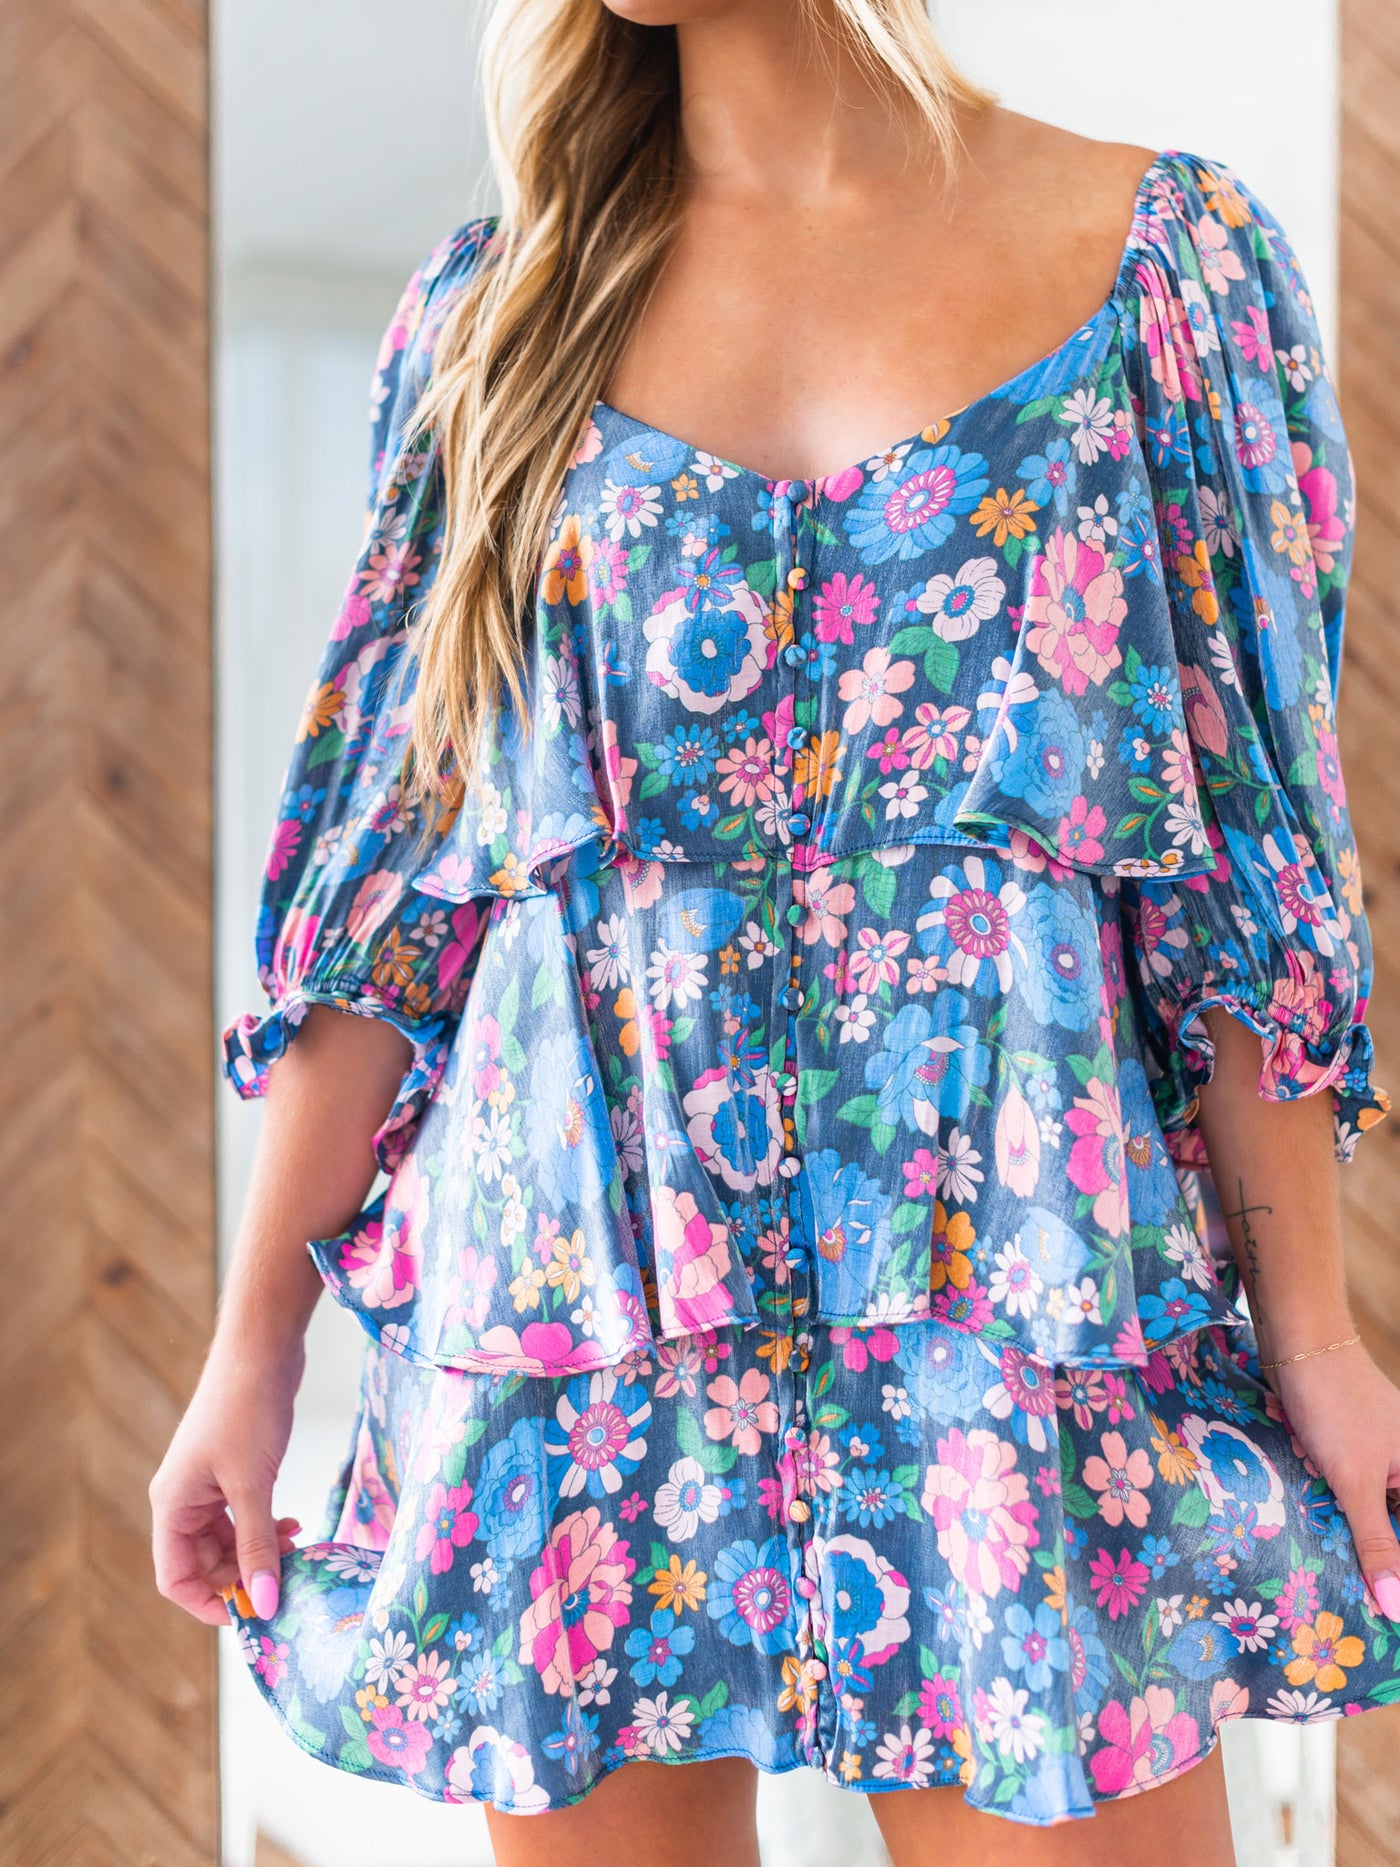 Wishing For You Floral Dress